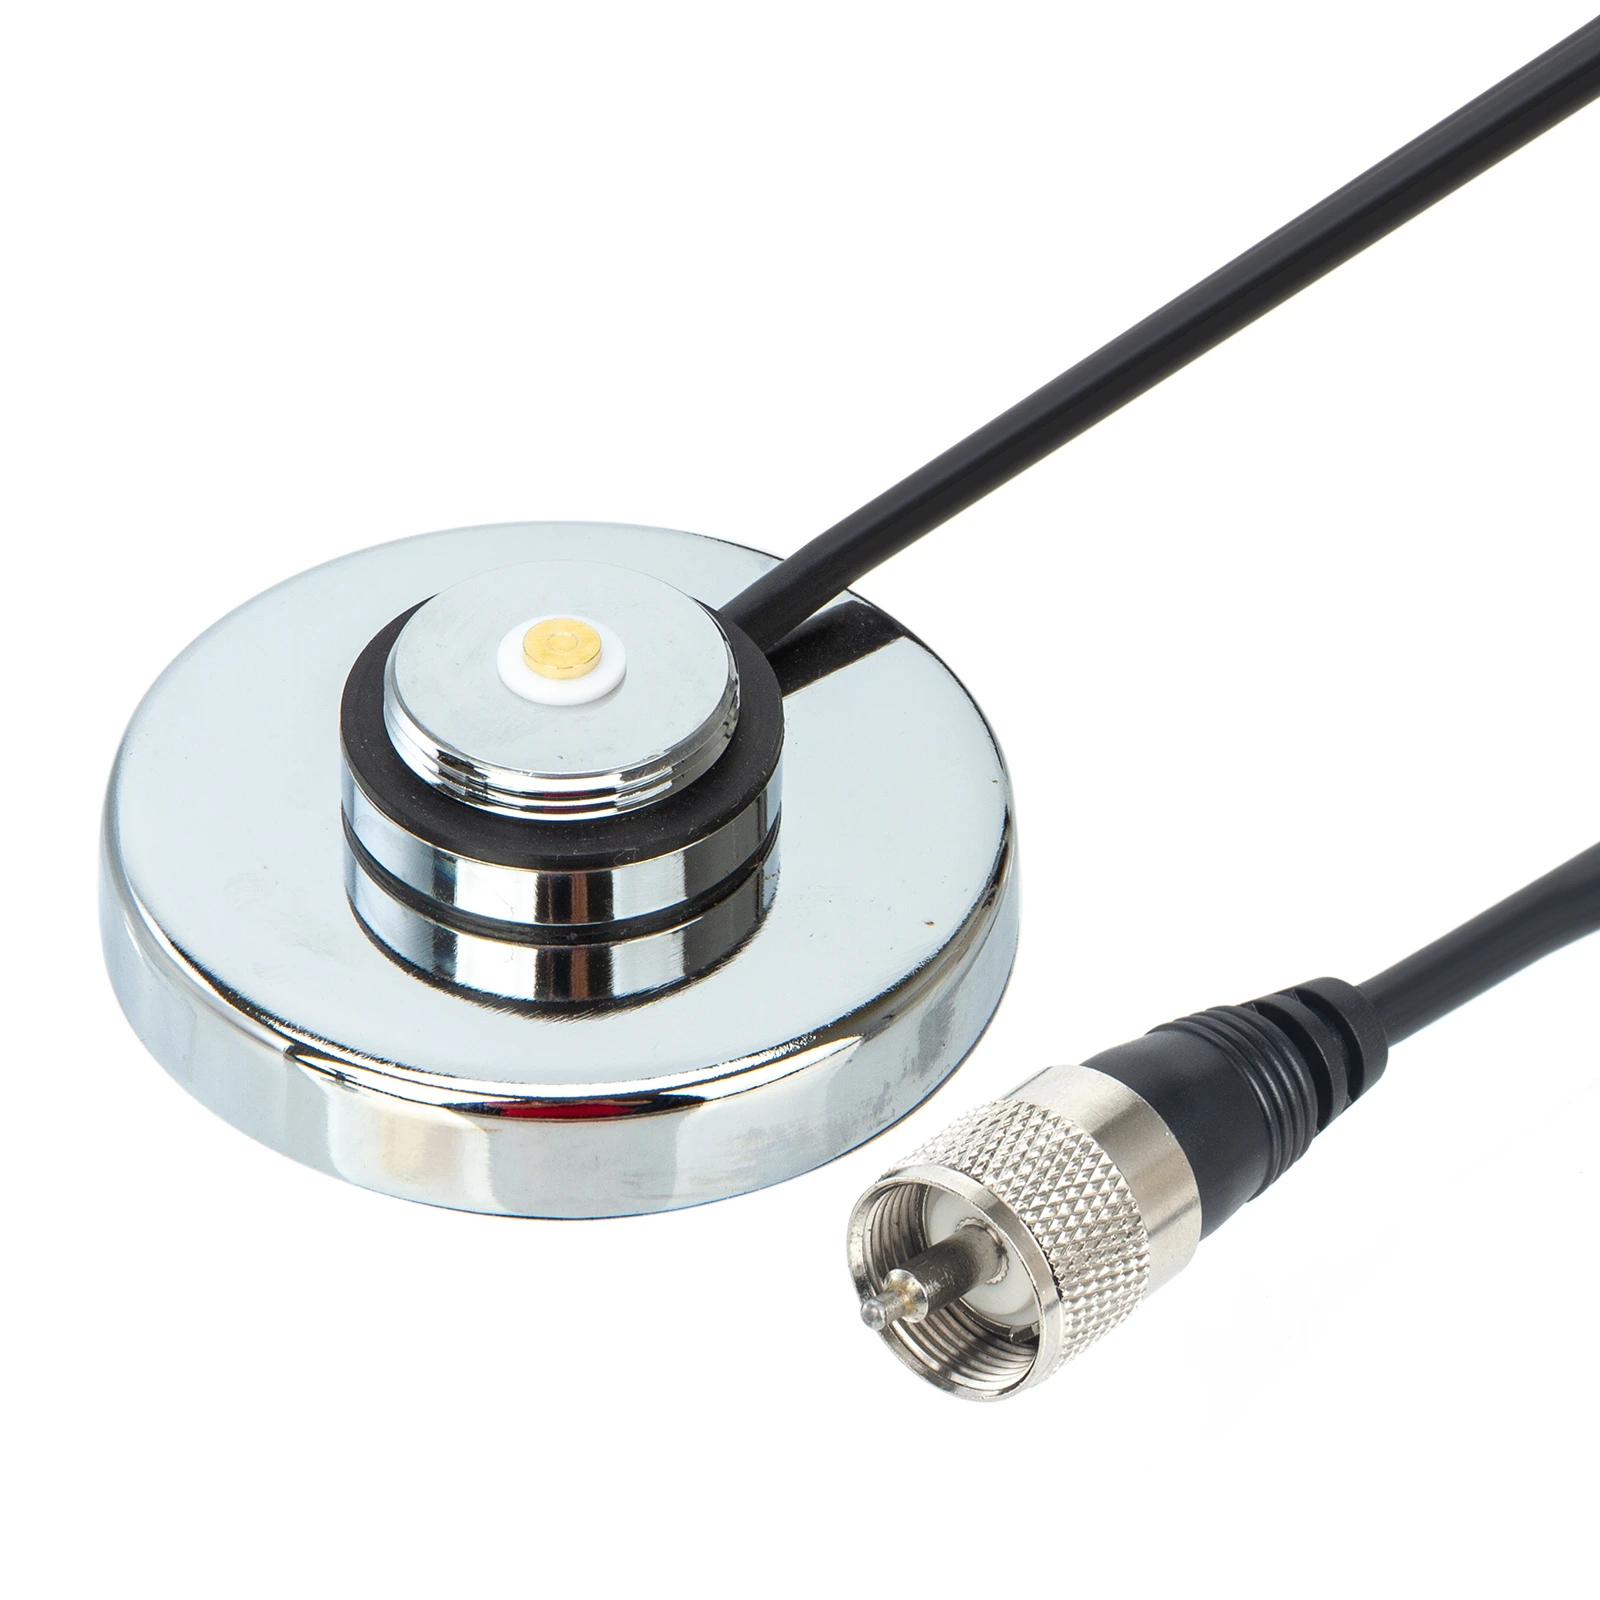 NB-70 silvery 7CM NMO Mount Magnetic Base With 5M PL-259 RG-58 Coaxial Cable For QYT TYT Car Mobile Radio Antenna Mount